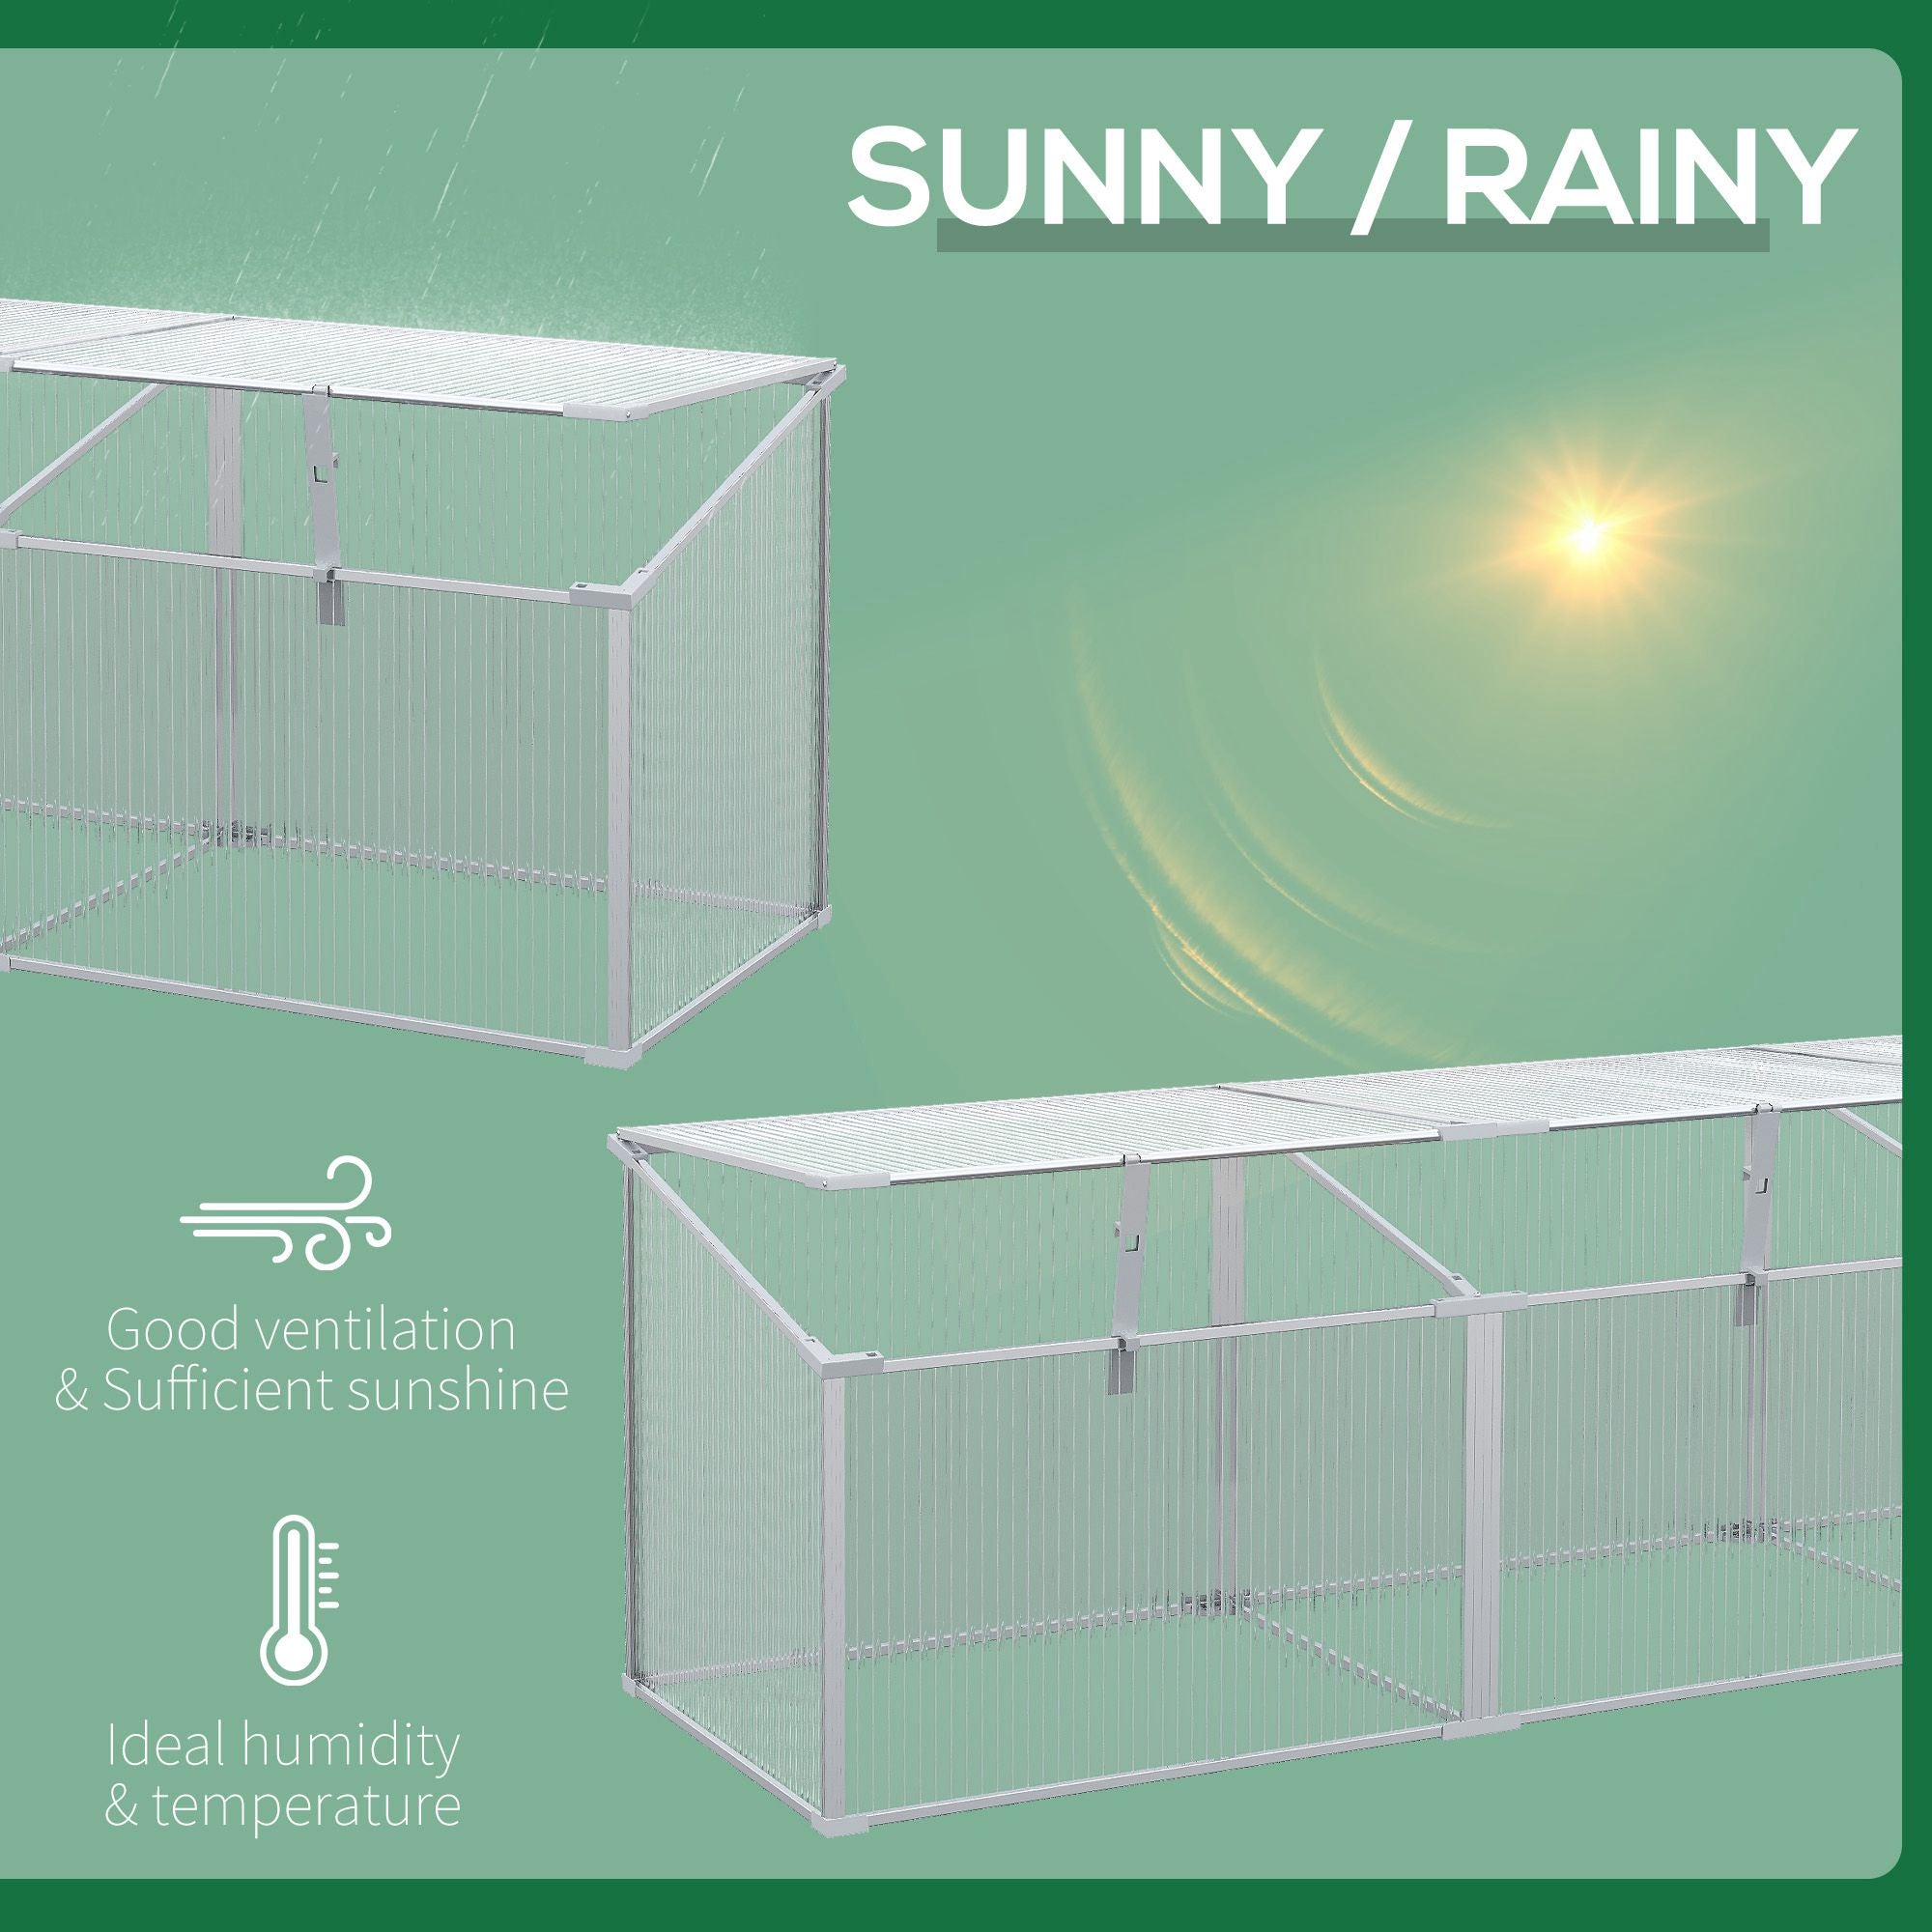 Outsunny Outdoor Greenhouse Polycarbonate Grow House Flower Vegetable Plants Raised Bed Garden Aluminium Cold Frame 180 x 51 x 51 cm